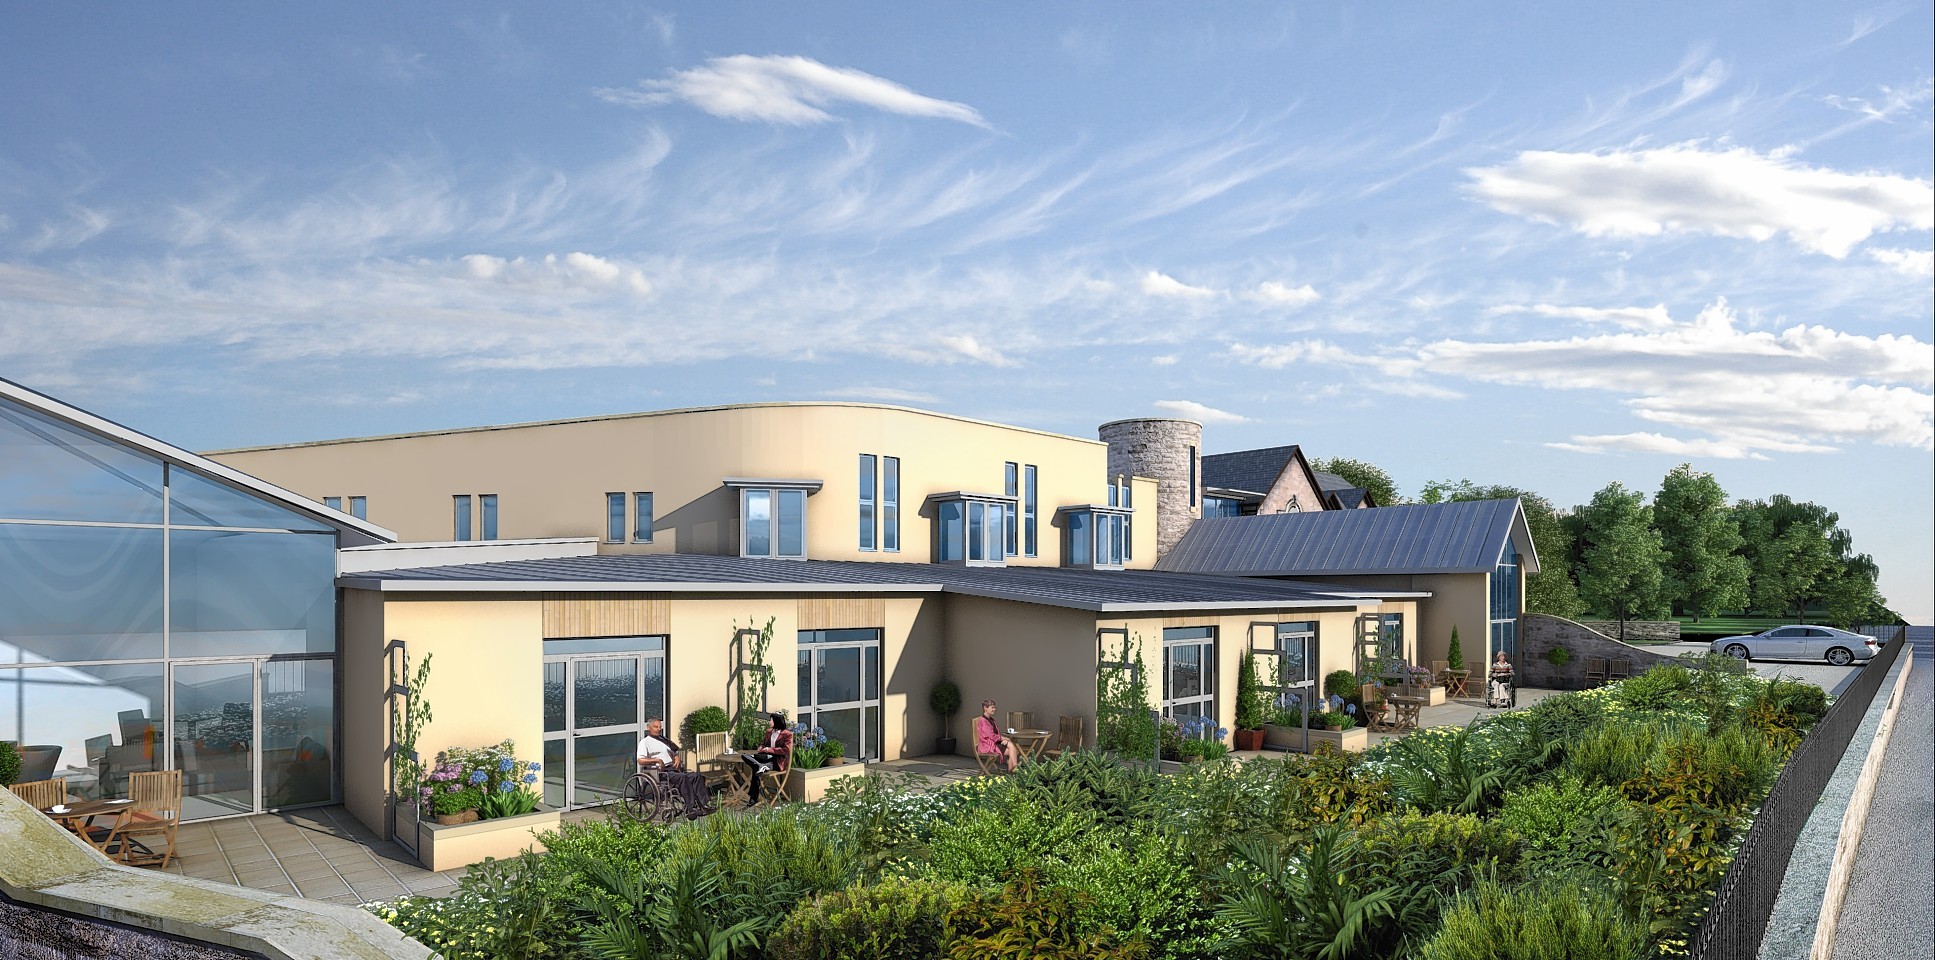 An artist's impression of the new look Highland Hospice